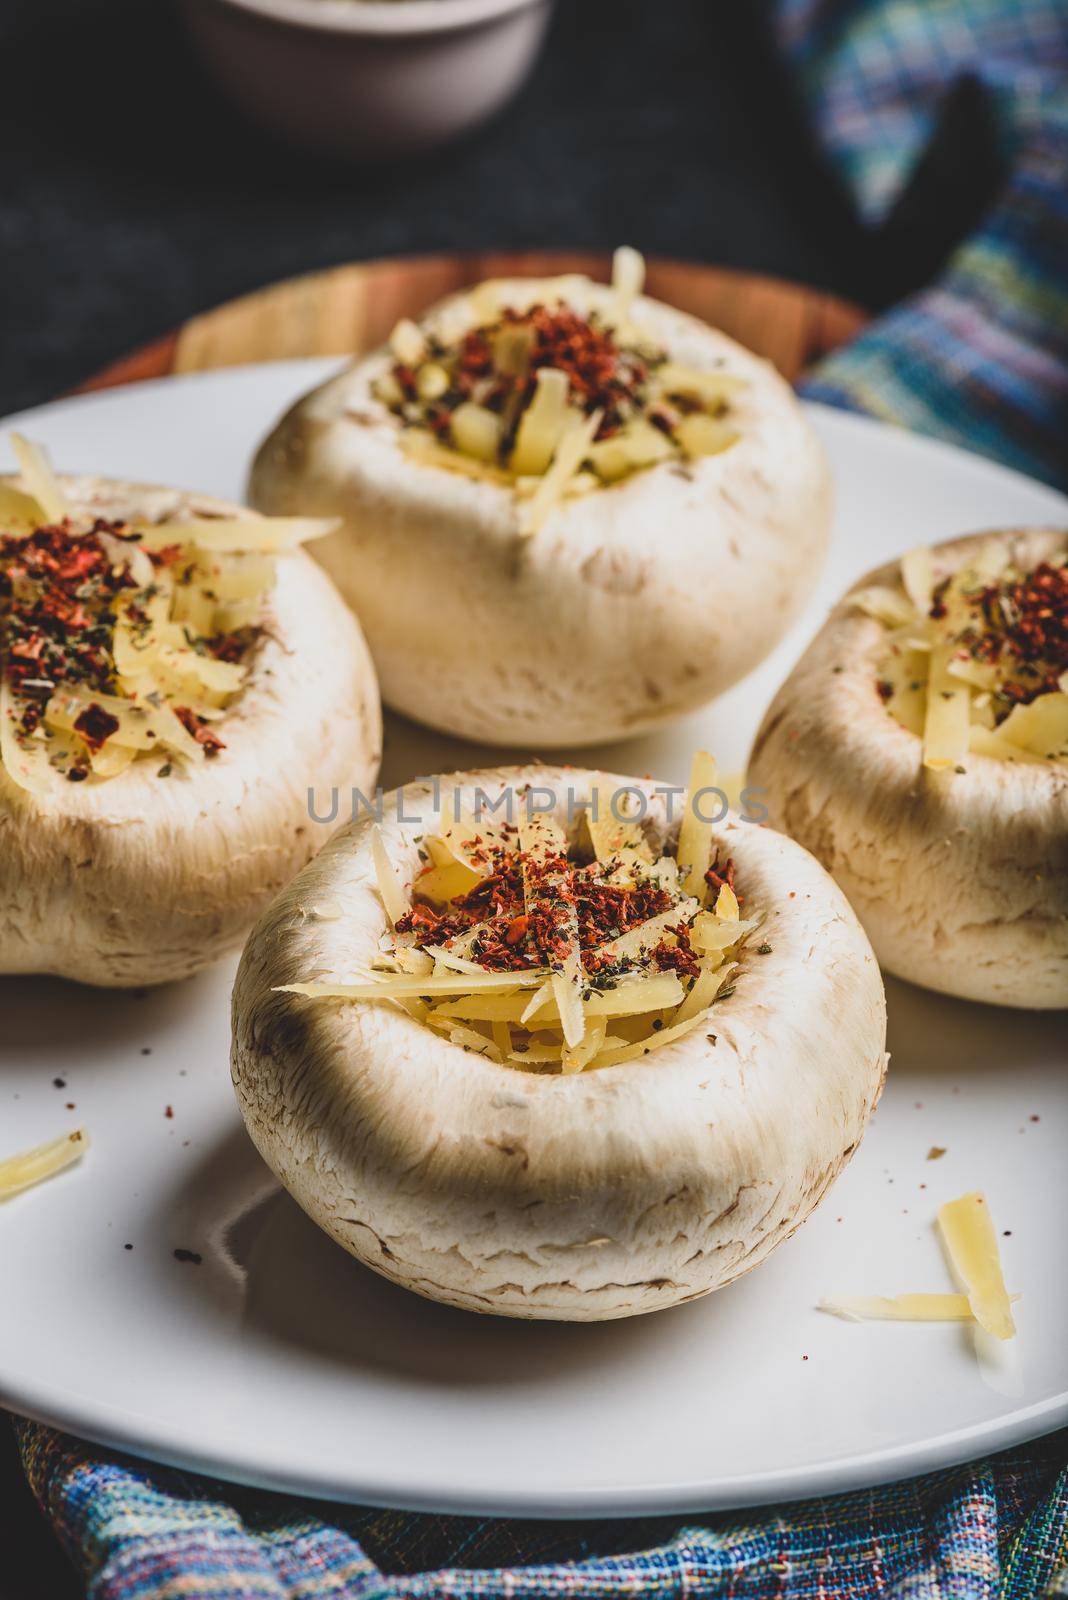 Button mushrooms stuffed with cheese and spices by Seva_blsv